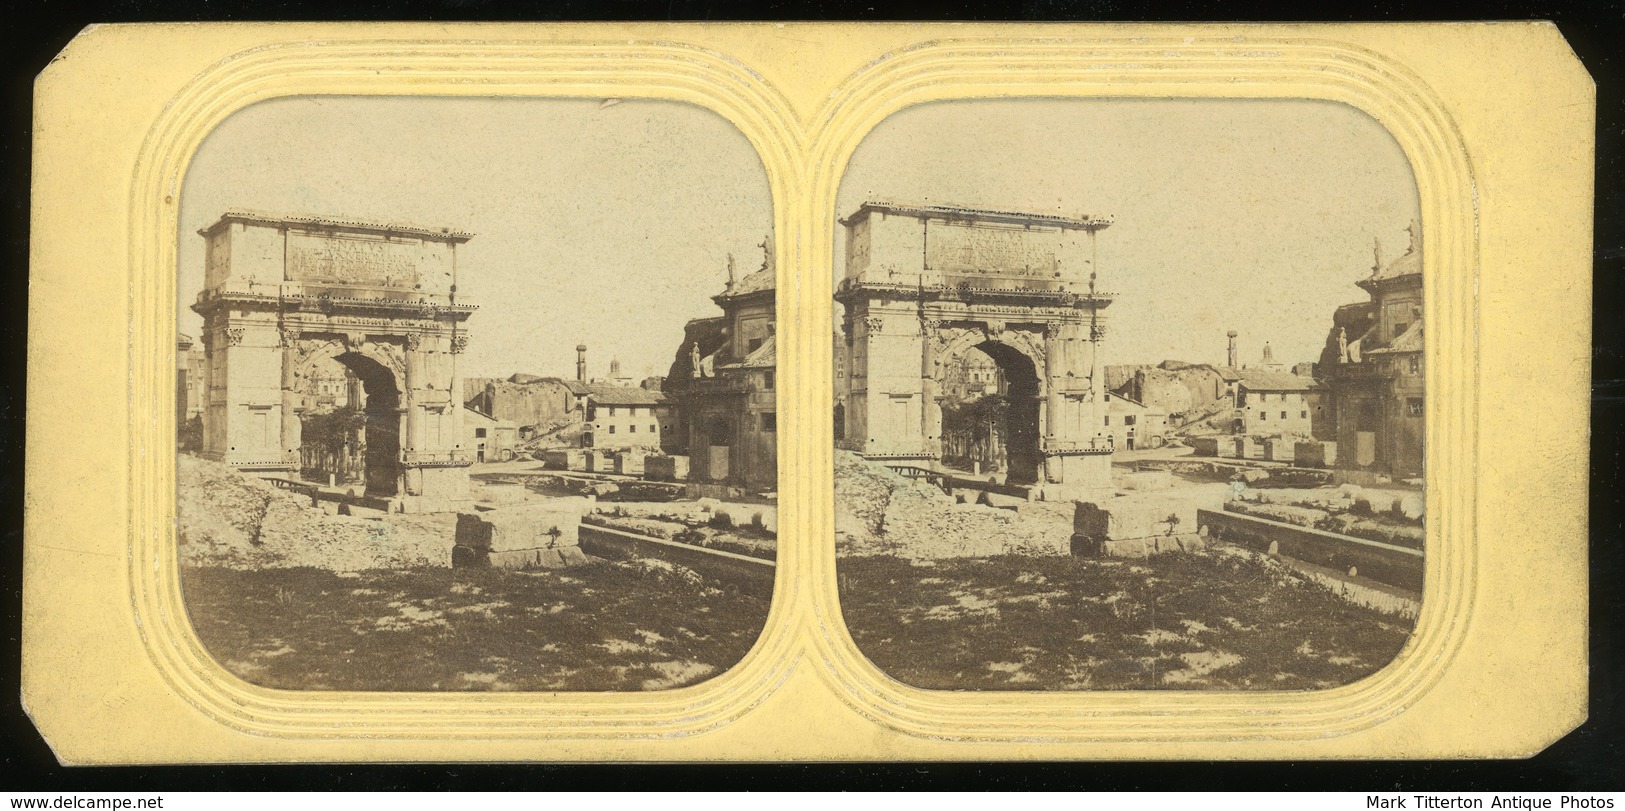 Stereoview - Rome ITALY - Hold-to-light Or Tissue View - Stereoscopes - Side-by-side Viewers